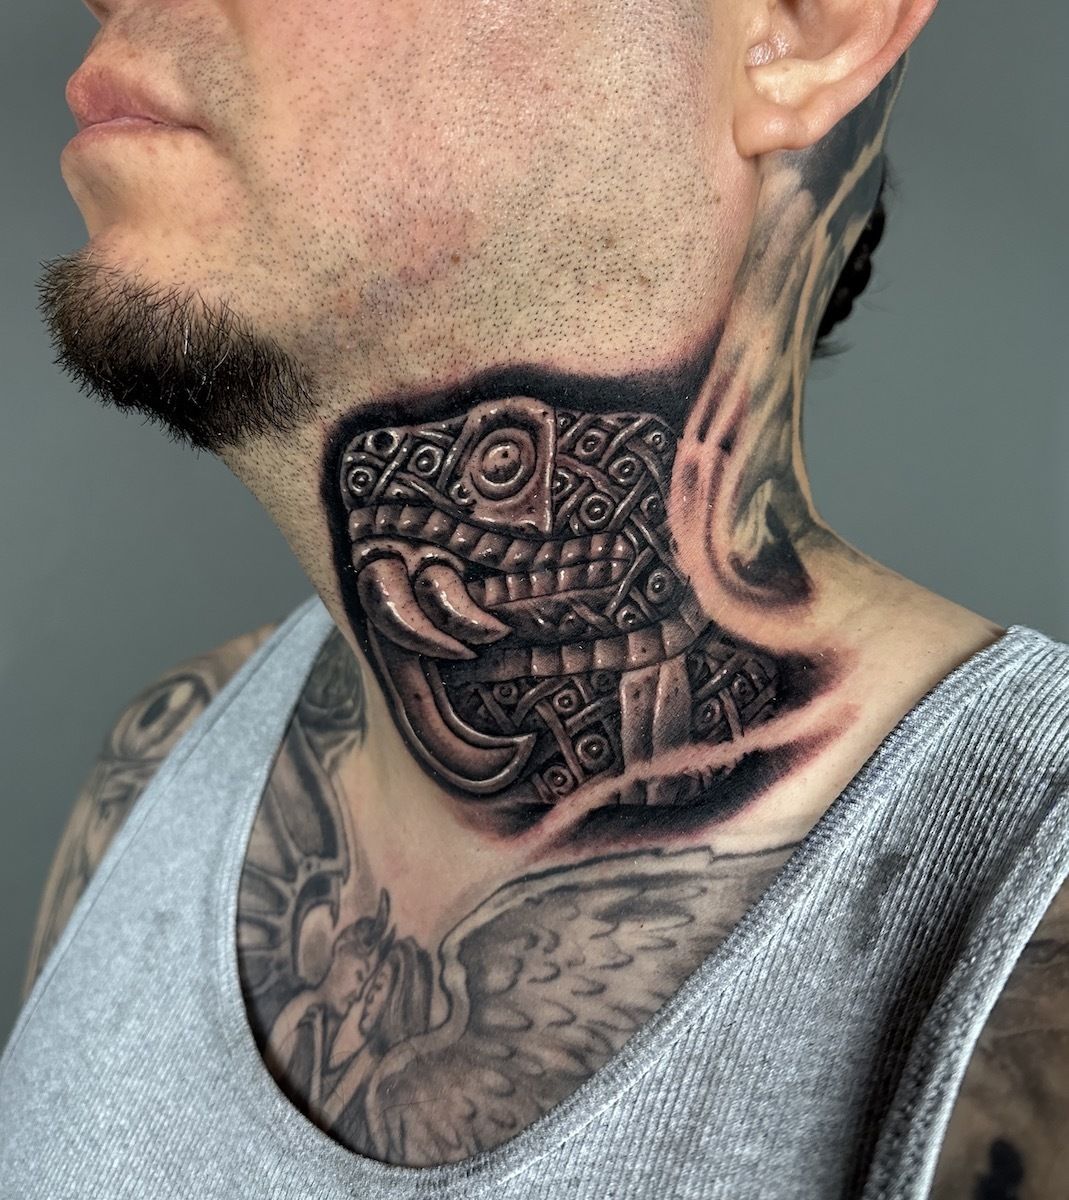 Does anyone know the meaning to I believe Aztec design? : r/TattooDesigns